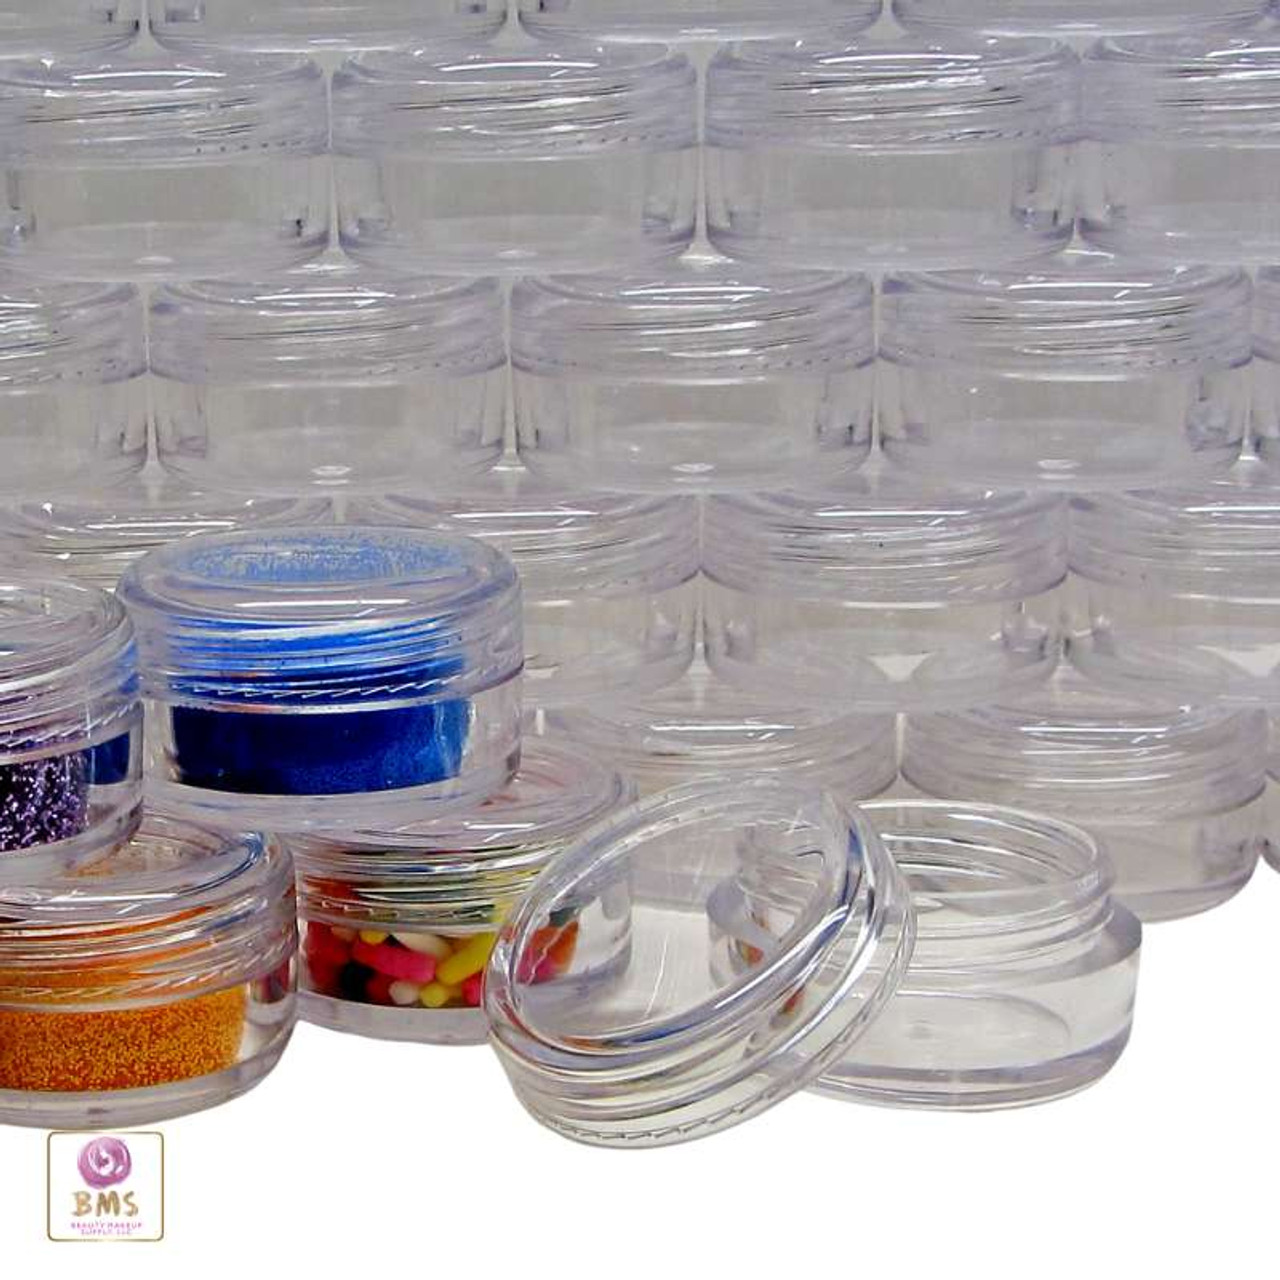 72Pcs Empty Sample Containers Set, FHDUSRYO 5 Grams Small Cosmetic  Containers with Lids, Plastic Travel Makeup Jar with Spray Bottle,  Spatulas, Label, Round Sample Jar for Cream, Eye Shadow, Jewelry - Yahoo  Shopping